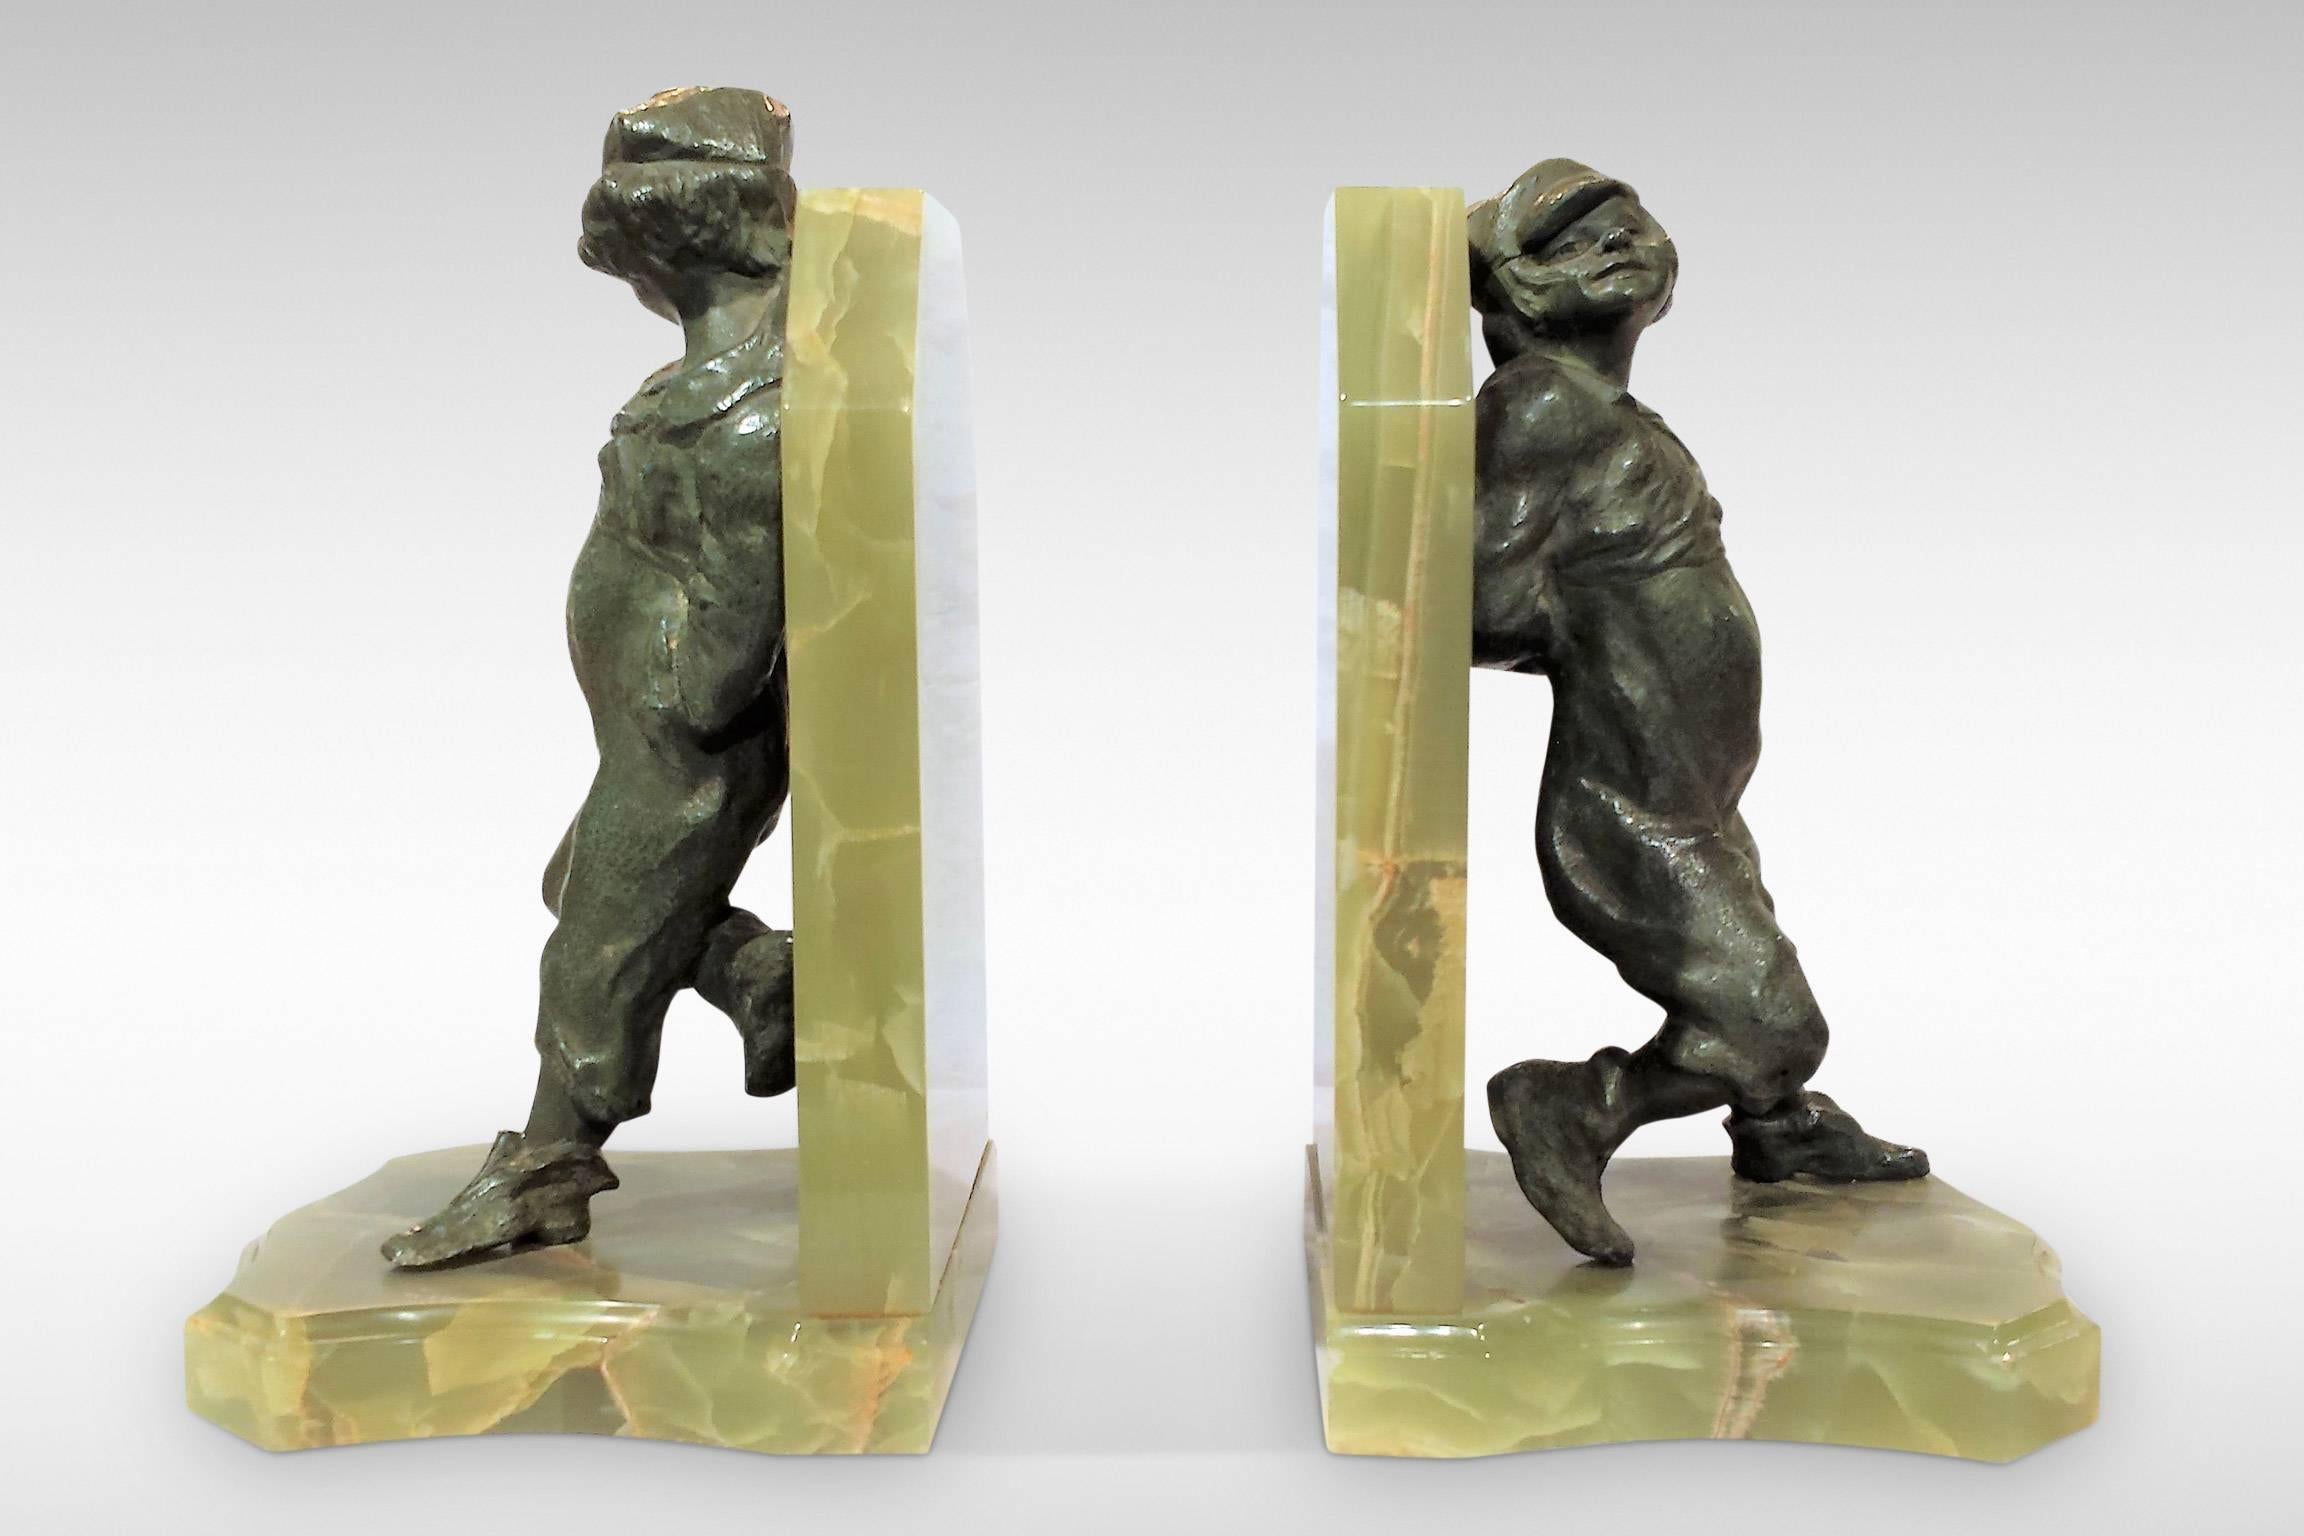 A delightful pair of bookends featuring bronze sculptures of two young boys mounted on onyx, by Henri Molins.
Signed, circa 1930.